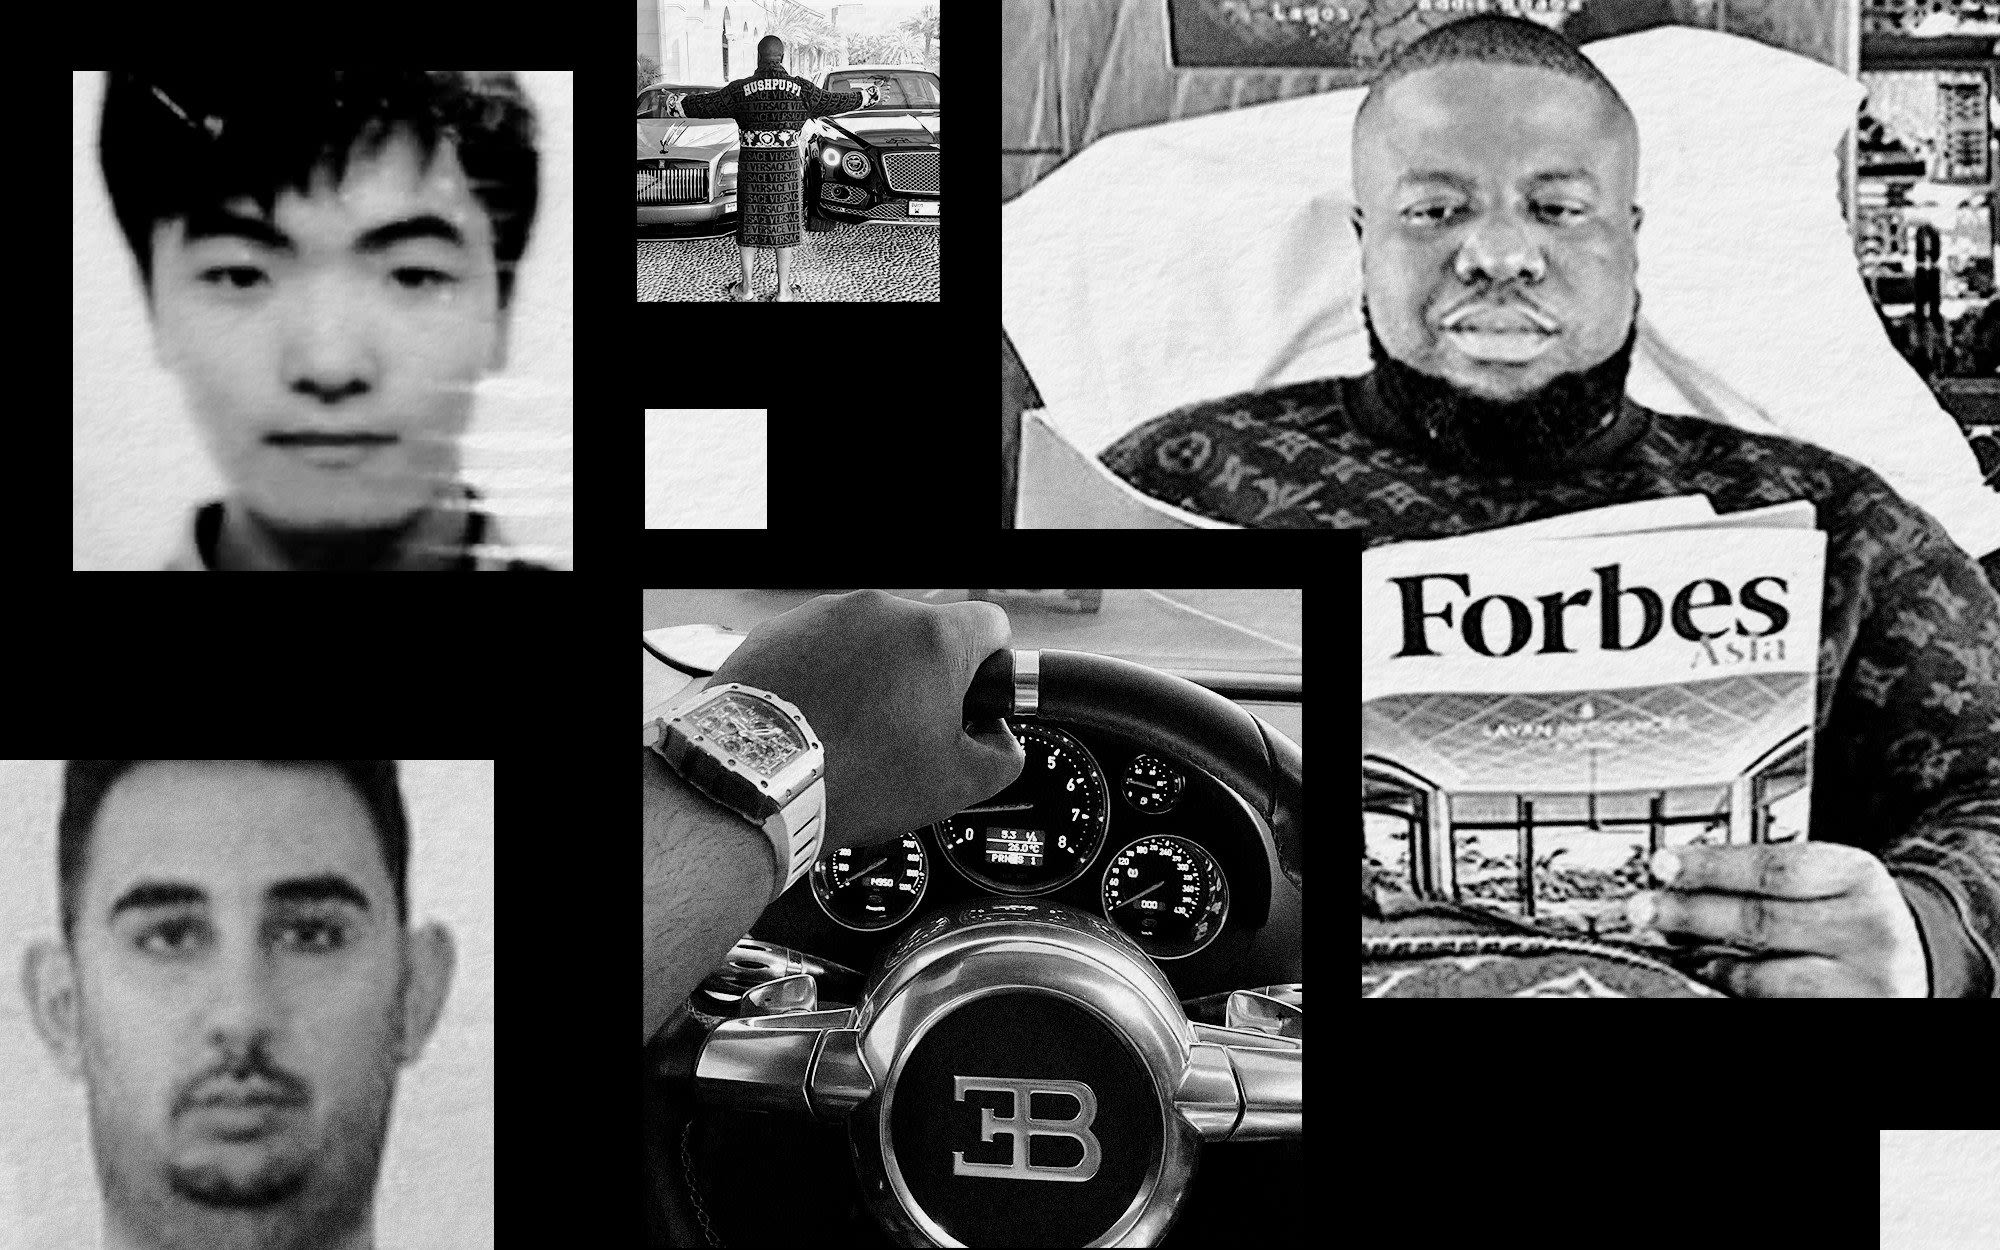 How a Nigerian influencer, North Korean hacker and Canadian scammer committed fraud worldwide